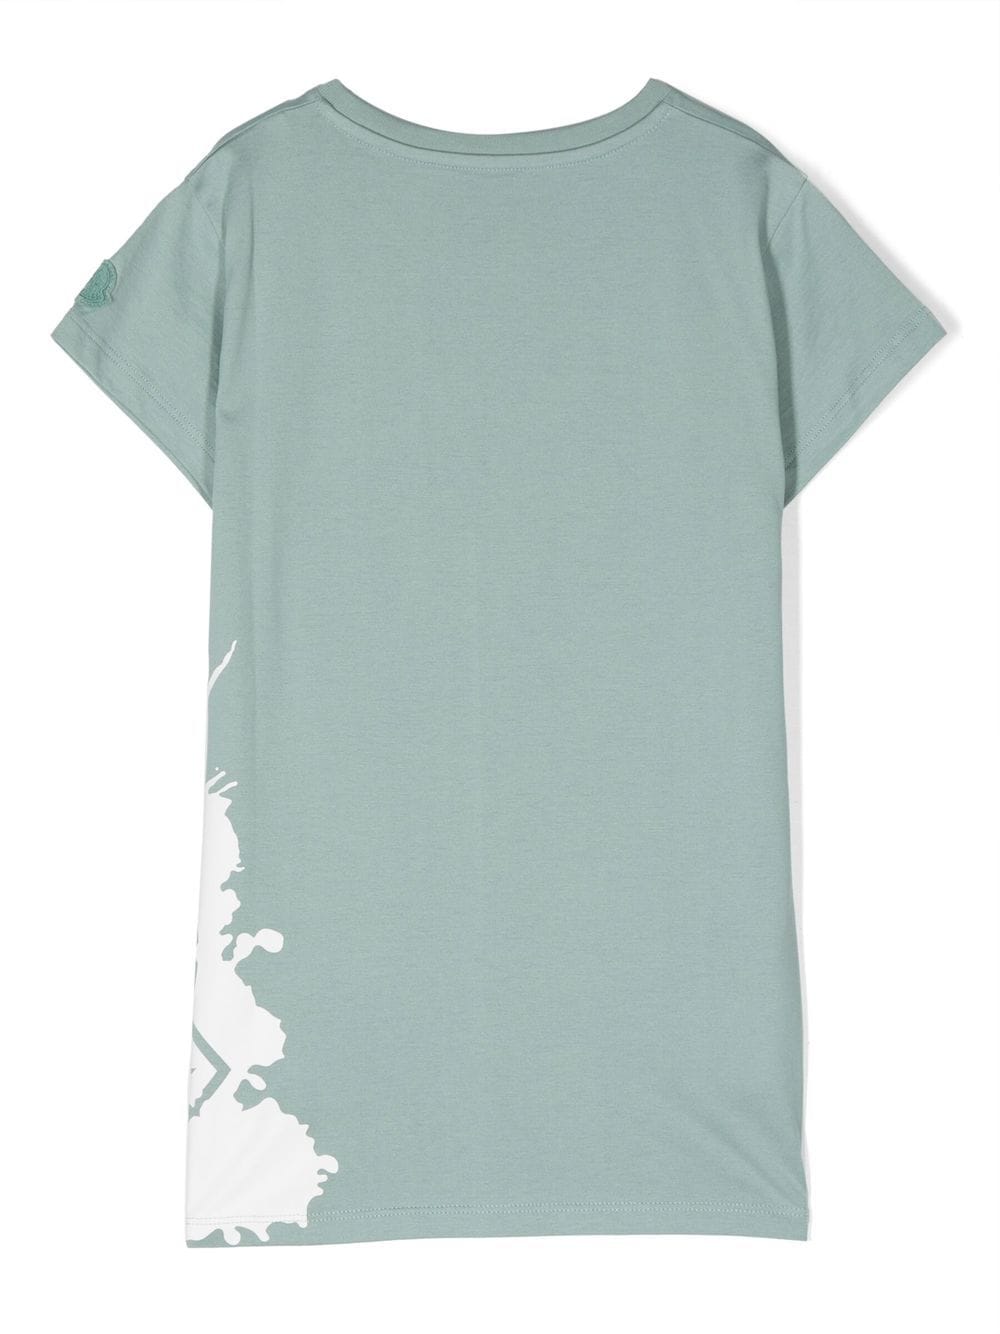 Green t-shirt for girls with logo